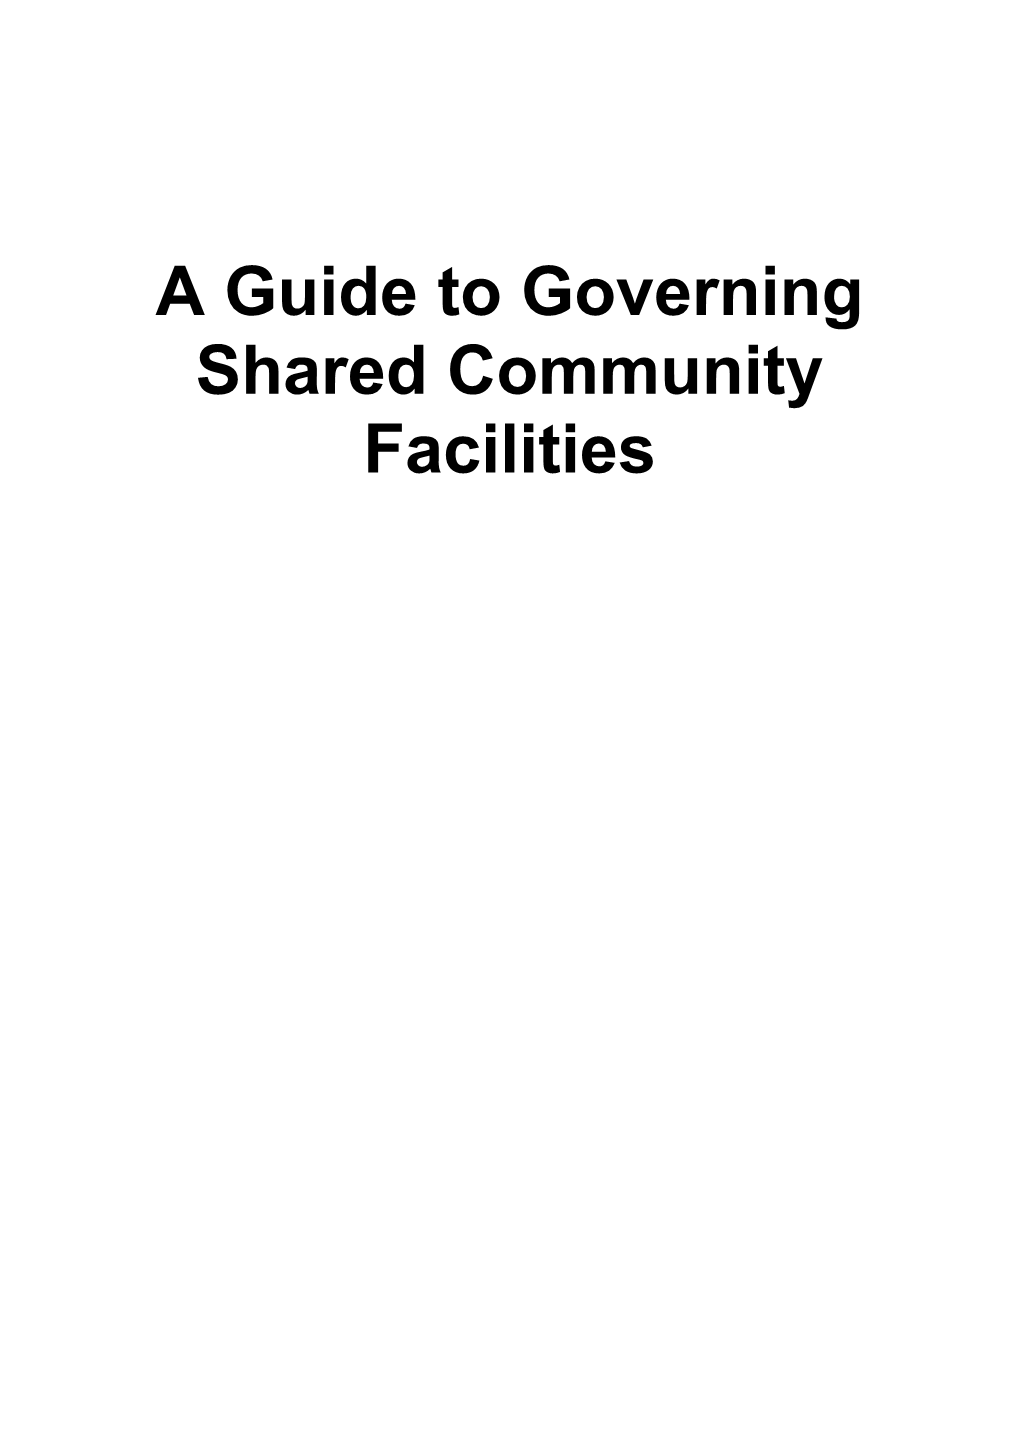 A Guide to Governing Shared Community Facilities